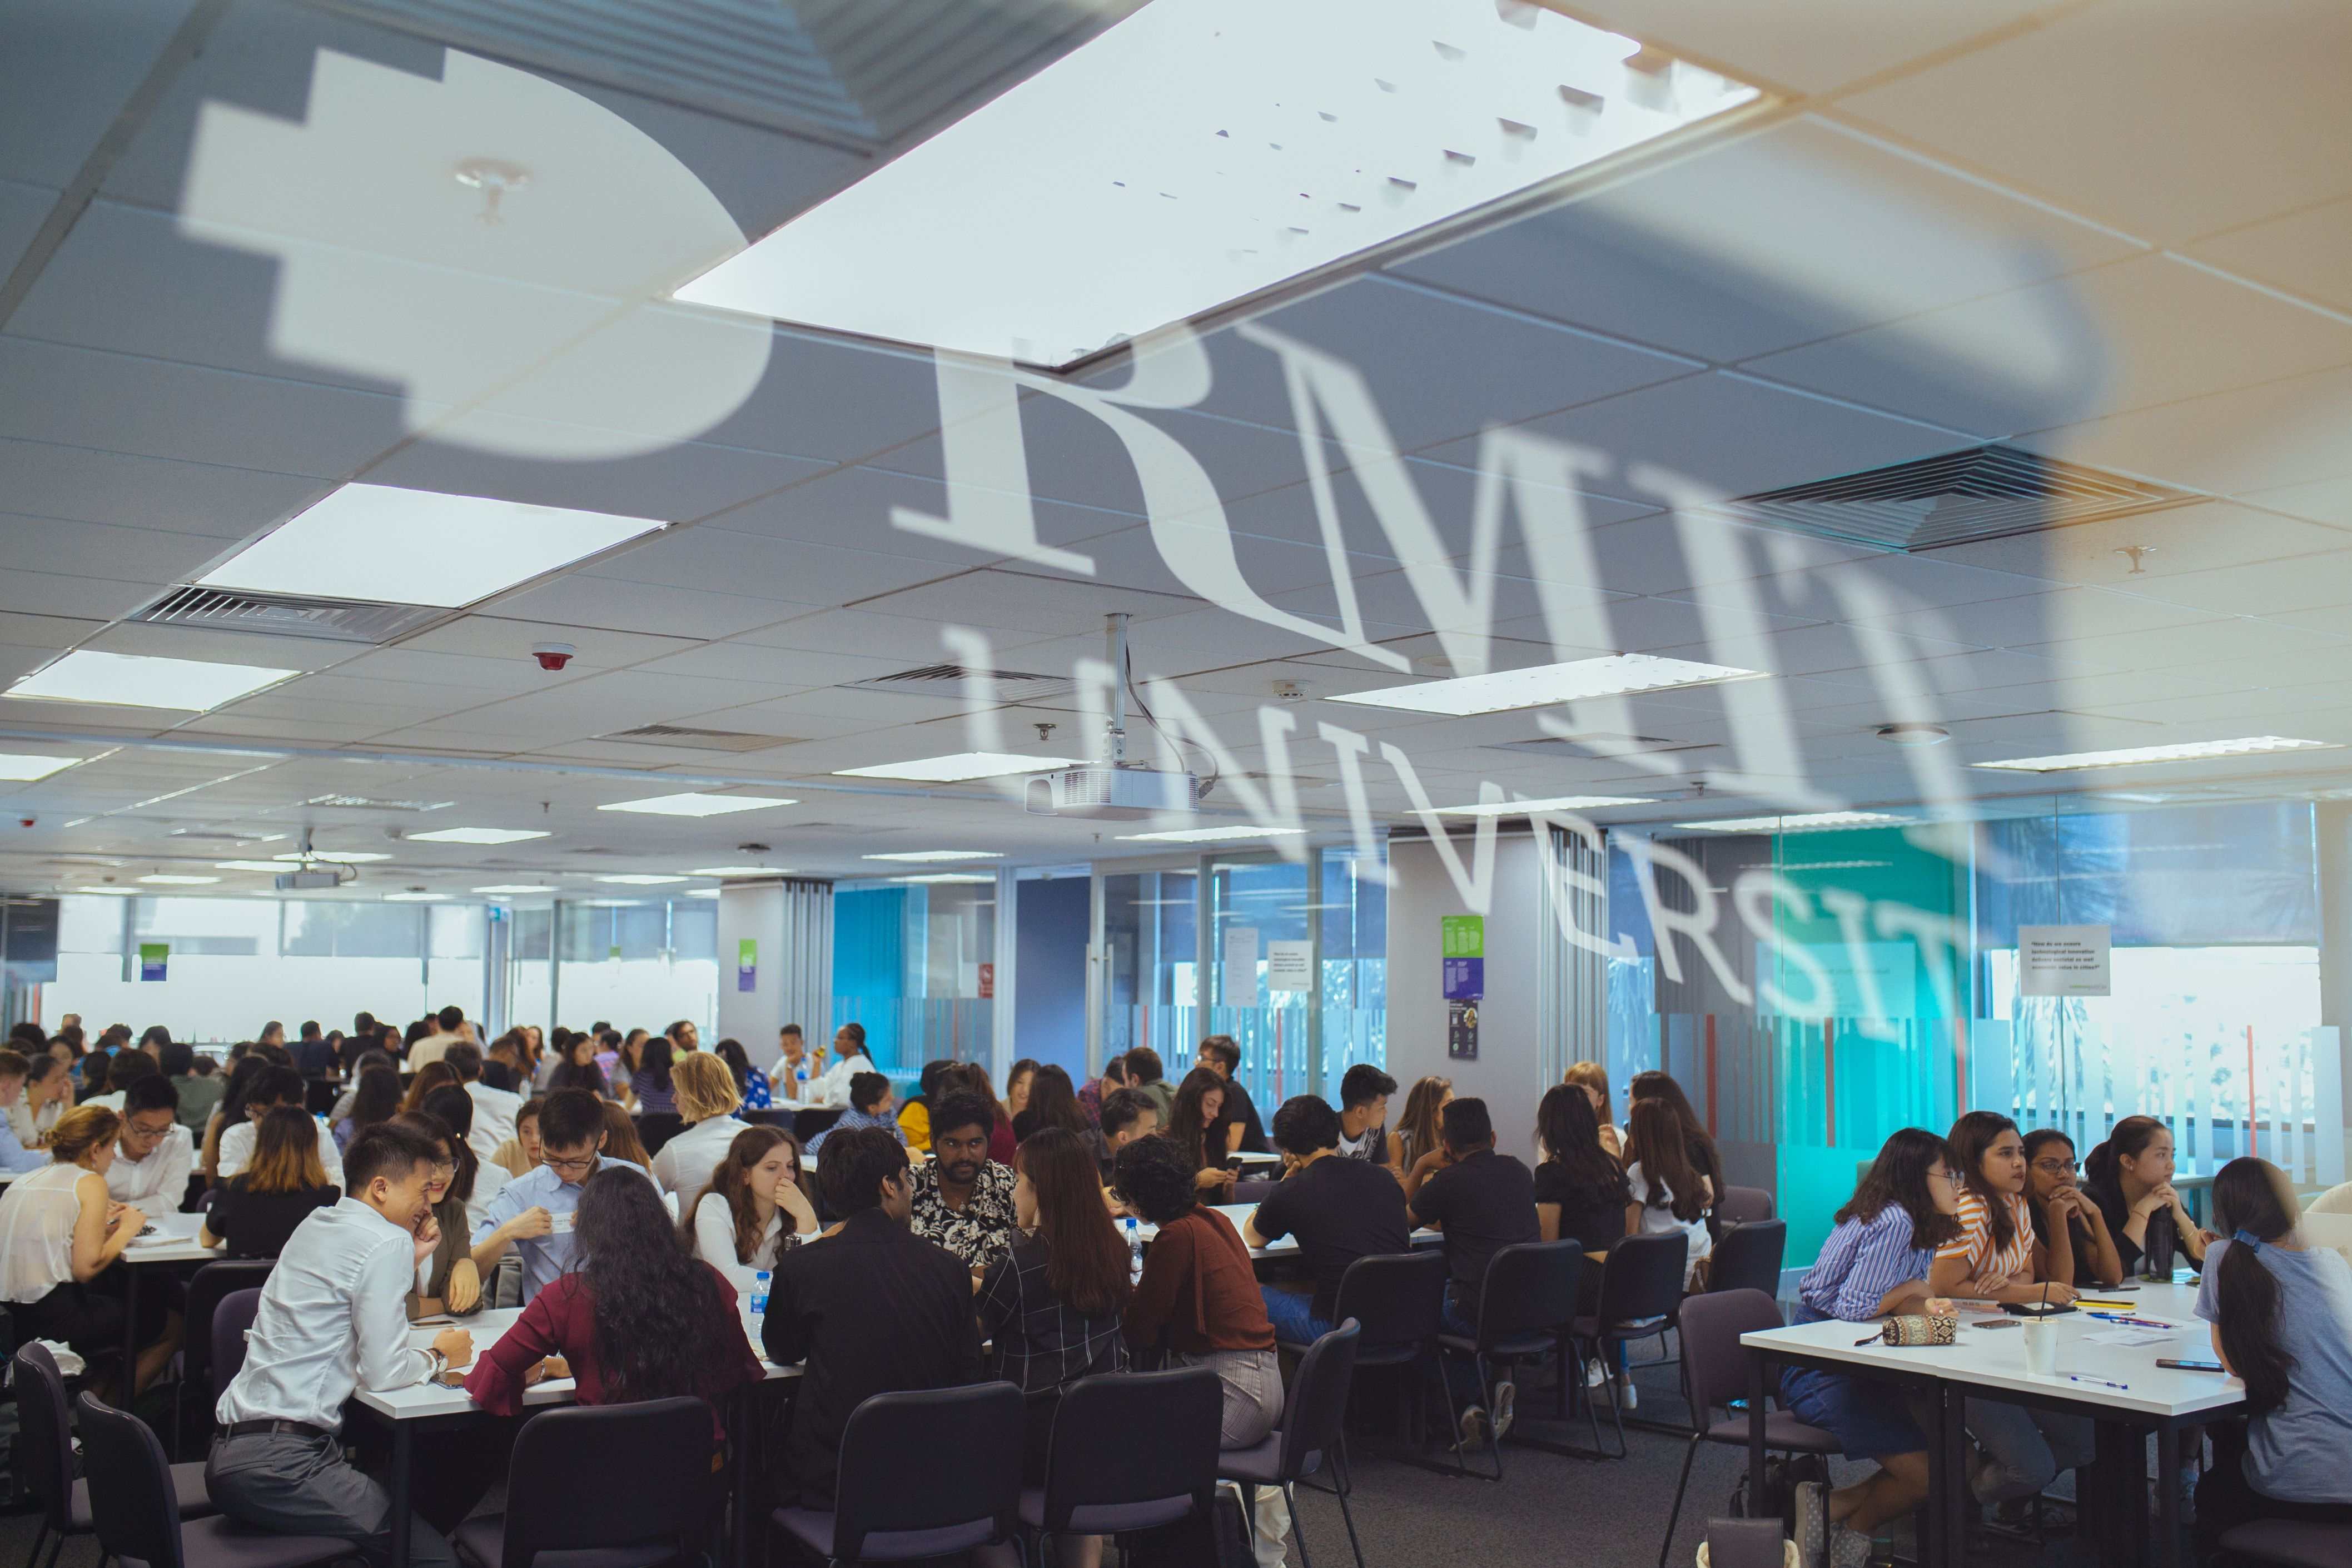 Almost 100 students from RMIT University and four partner institutions participated in the Global Leadership Experience this year. 